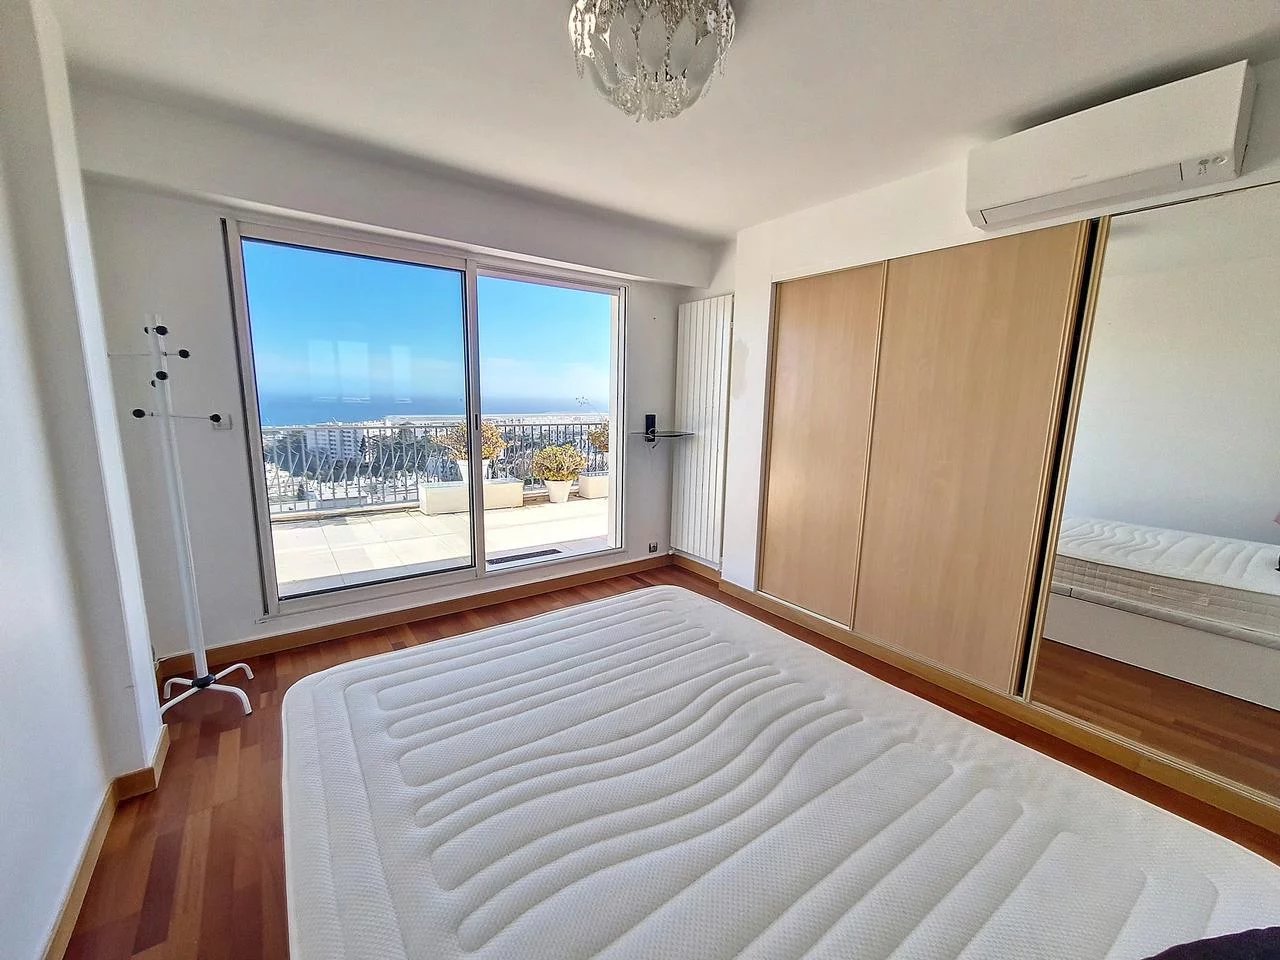 Appartement  3 Rooms 85.17m2  for sale   980 000 €